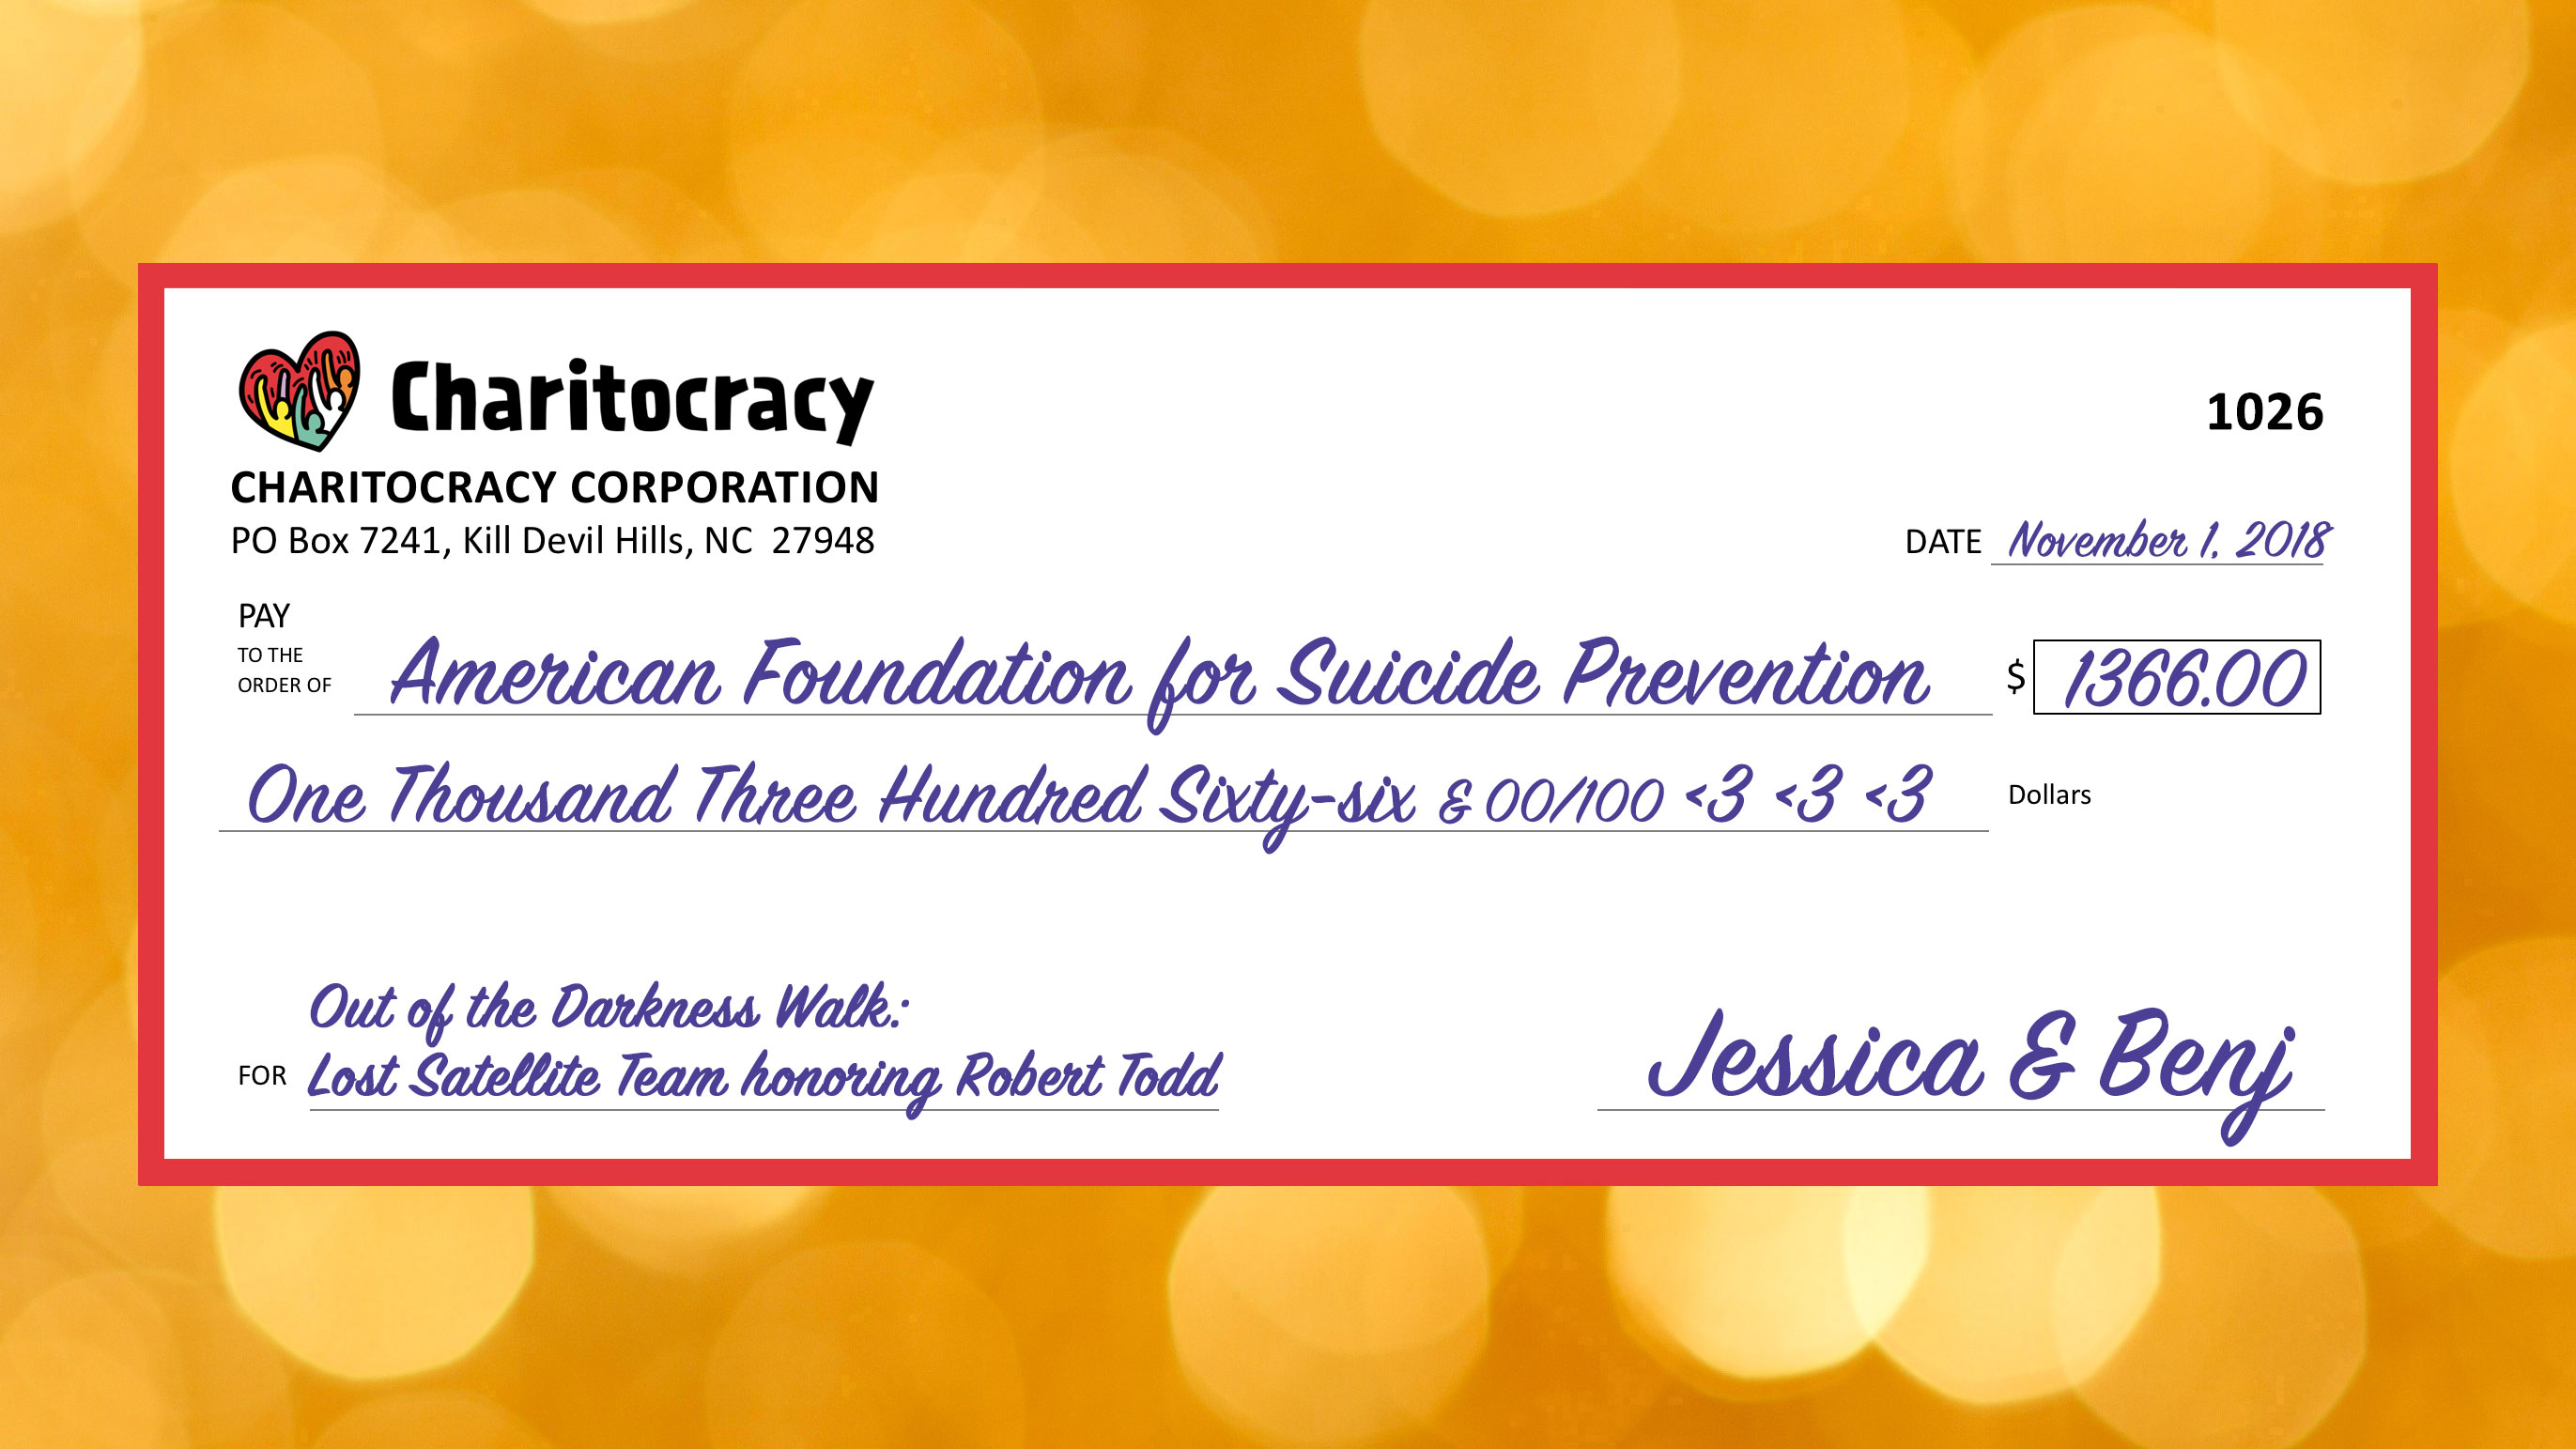 Charitocracy's 26th check to October winner American Foundation for Suicide Prevention for $1366